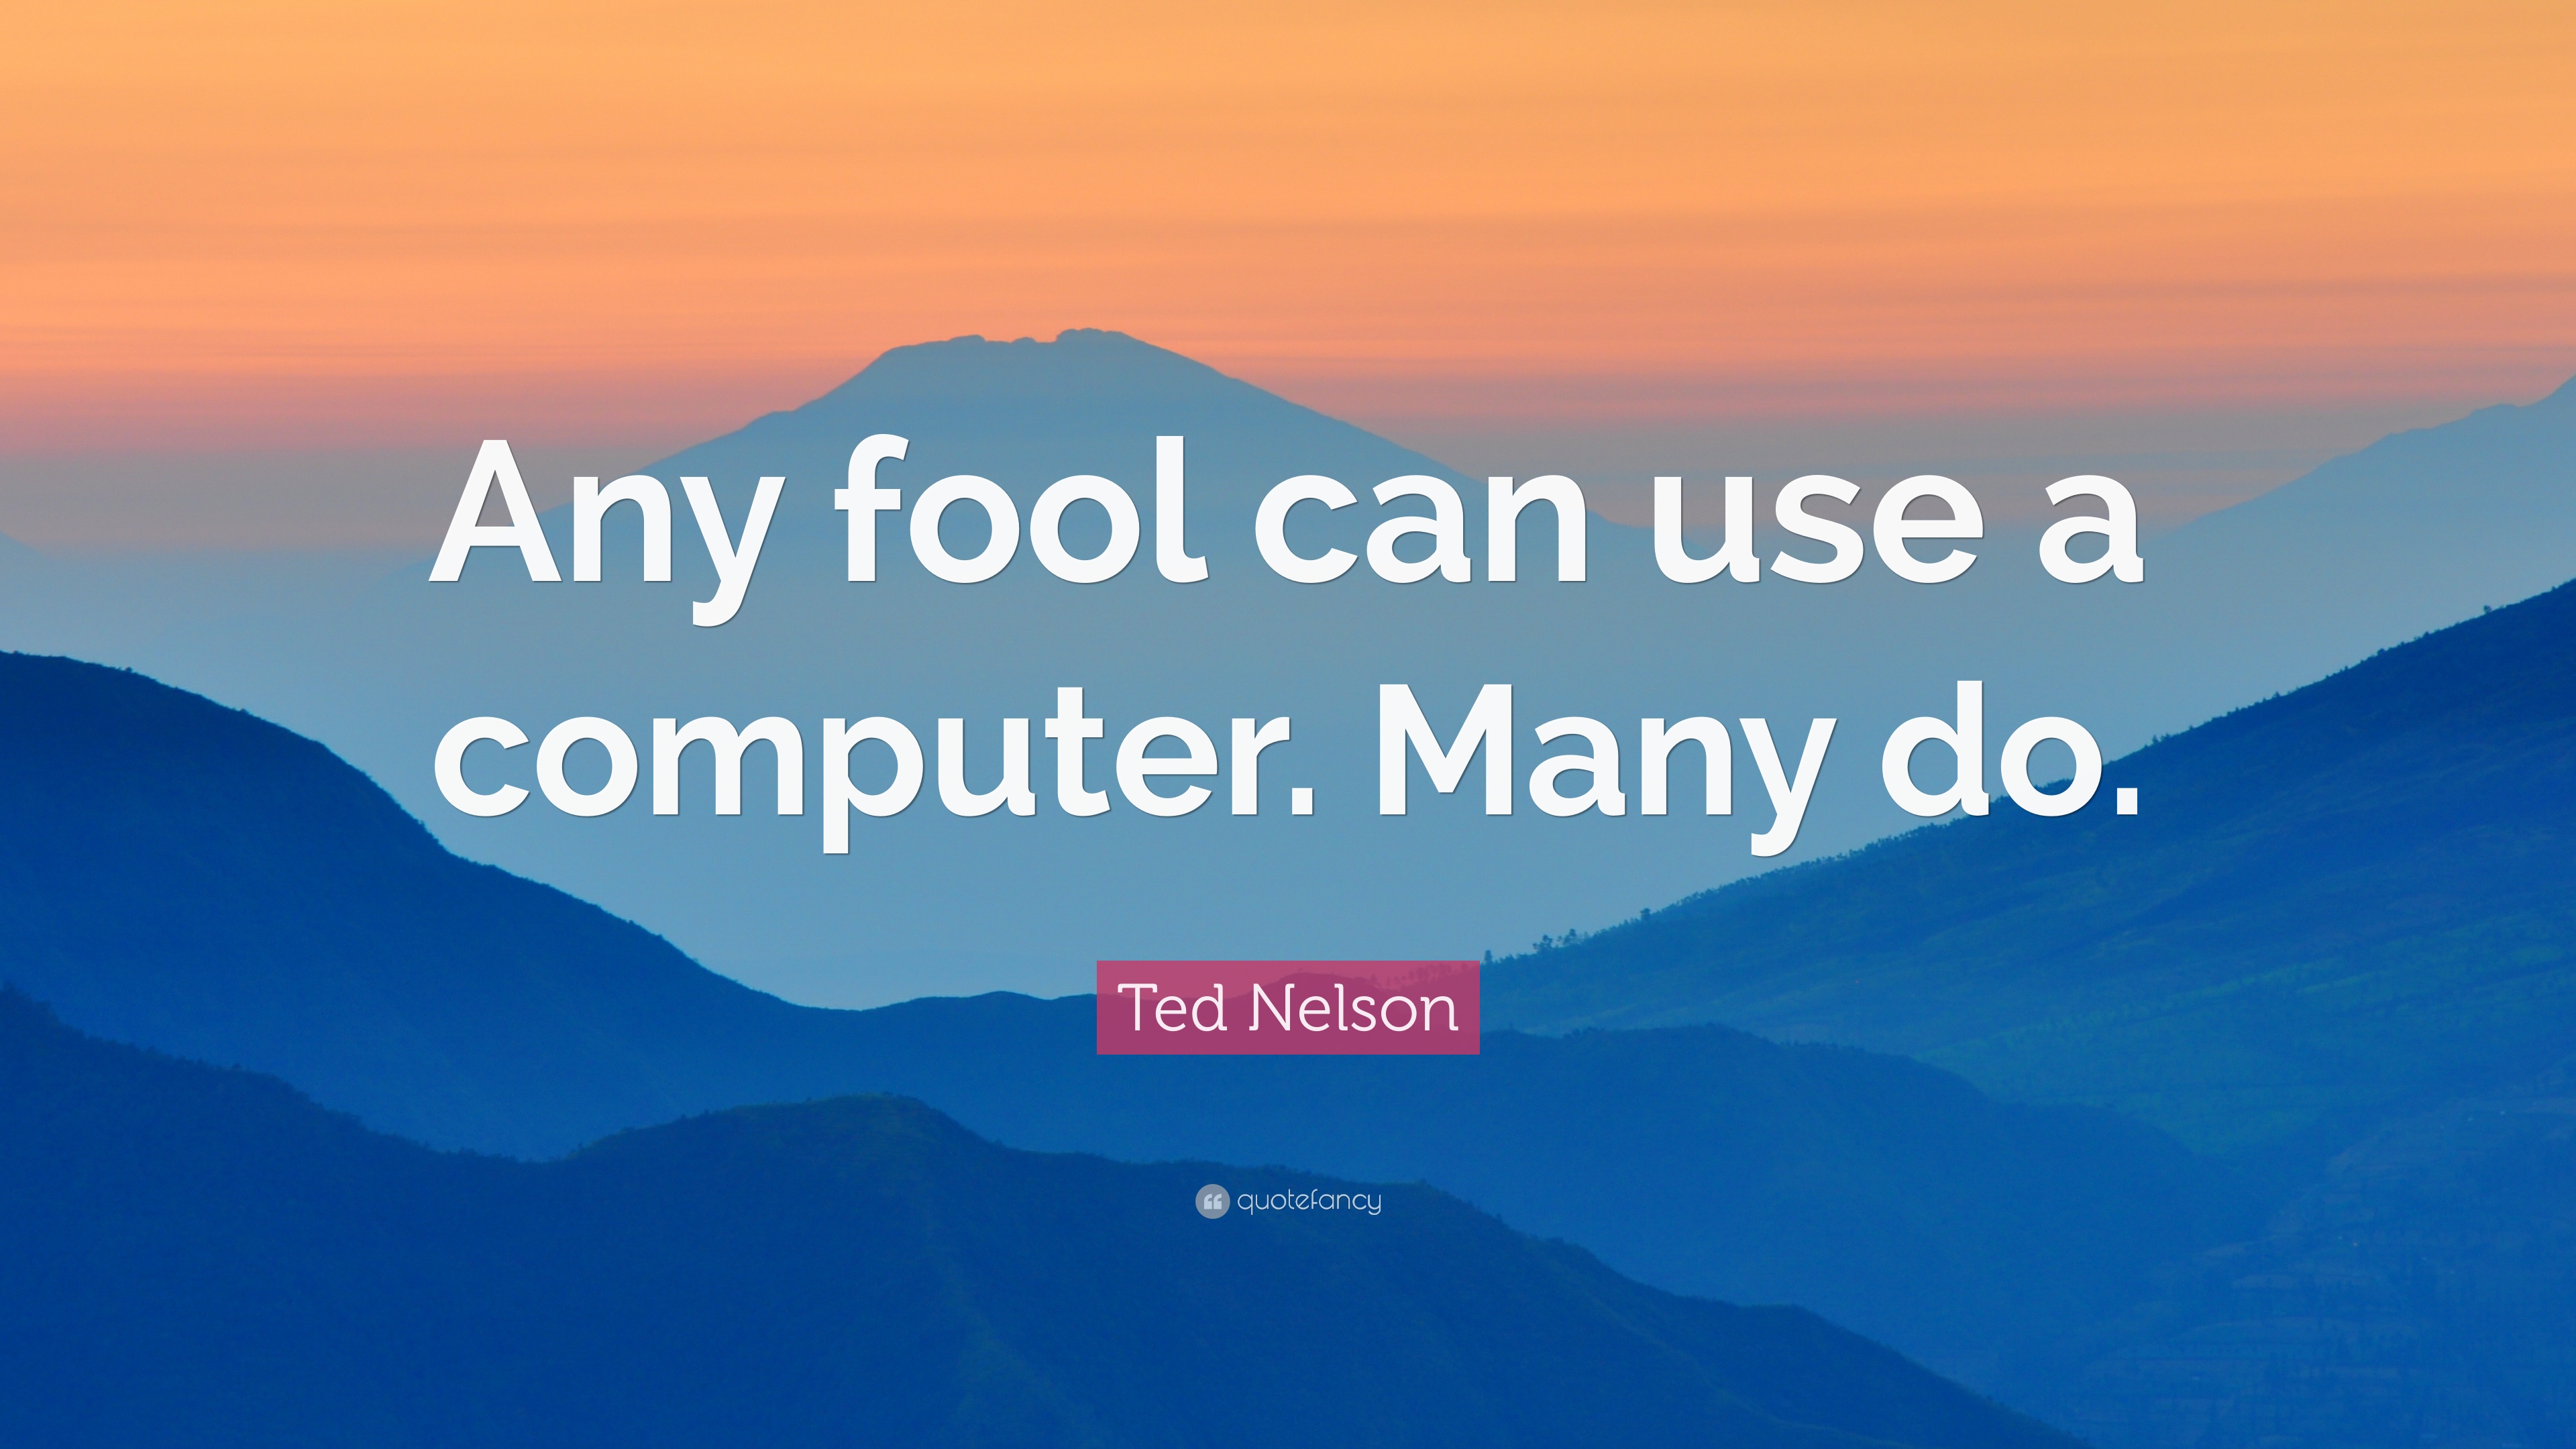 Ted Nelson Quotes (40 wallpaper)